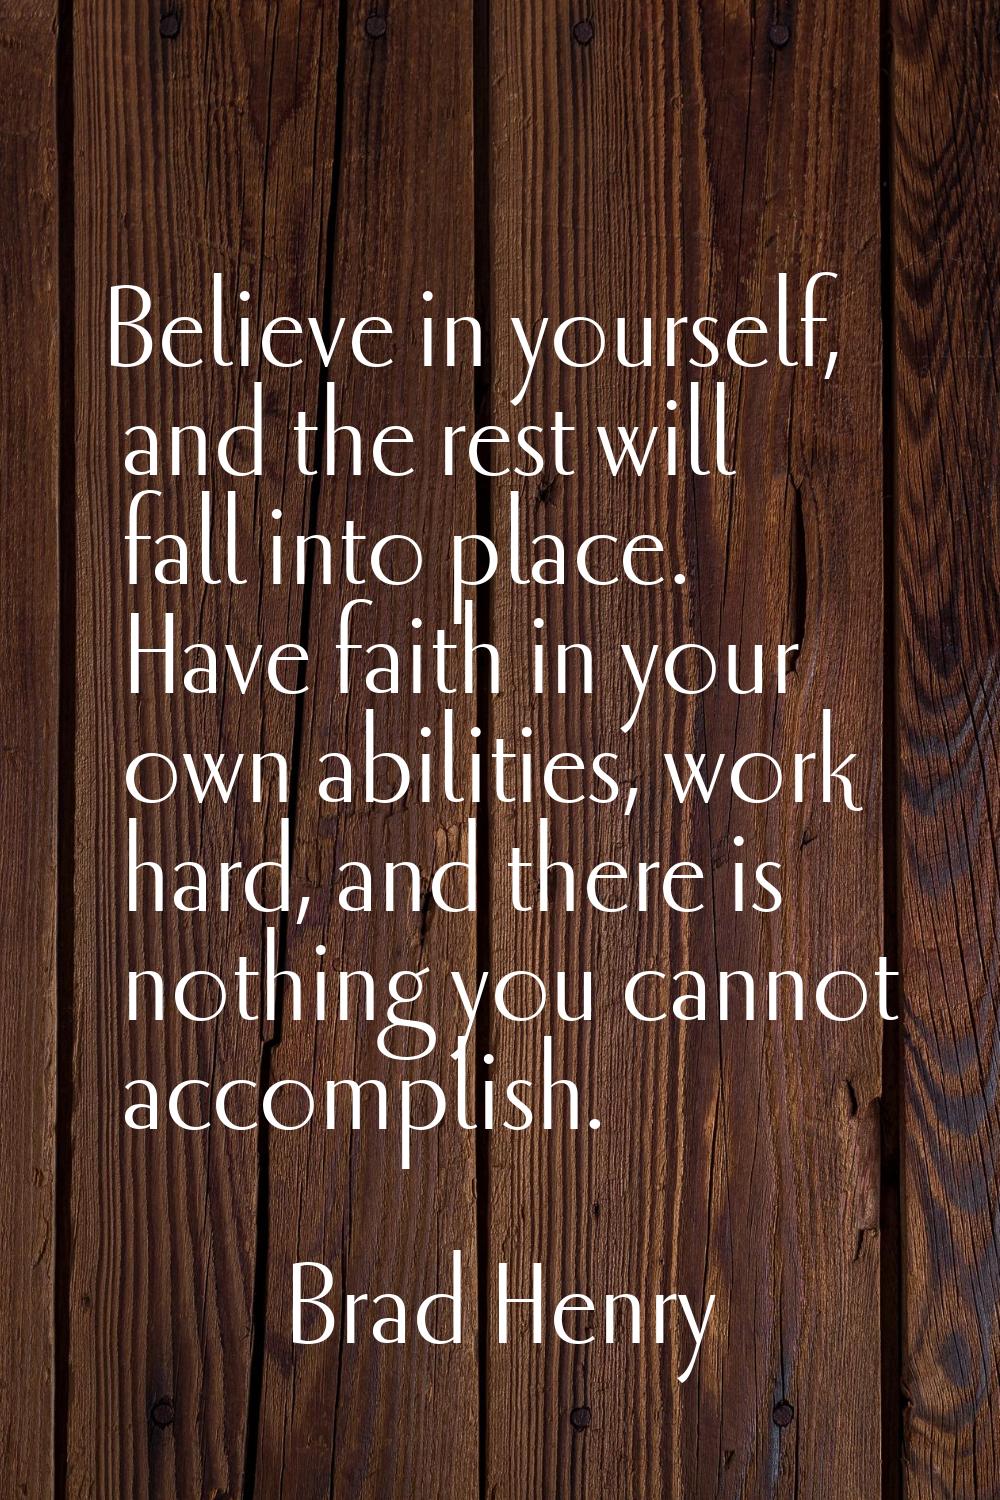 Believe in yourself, and the rest will fall into place. Have faith in your own abilities, work hard